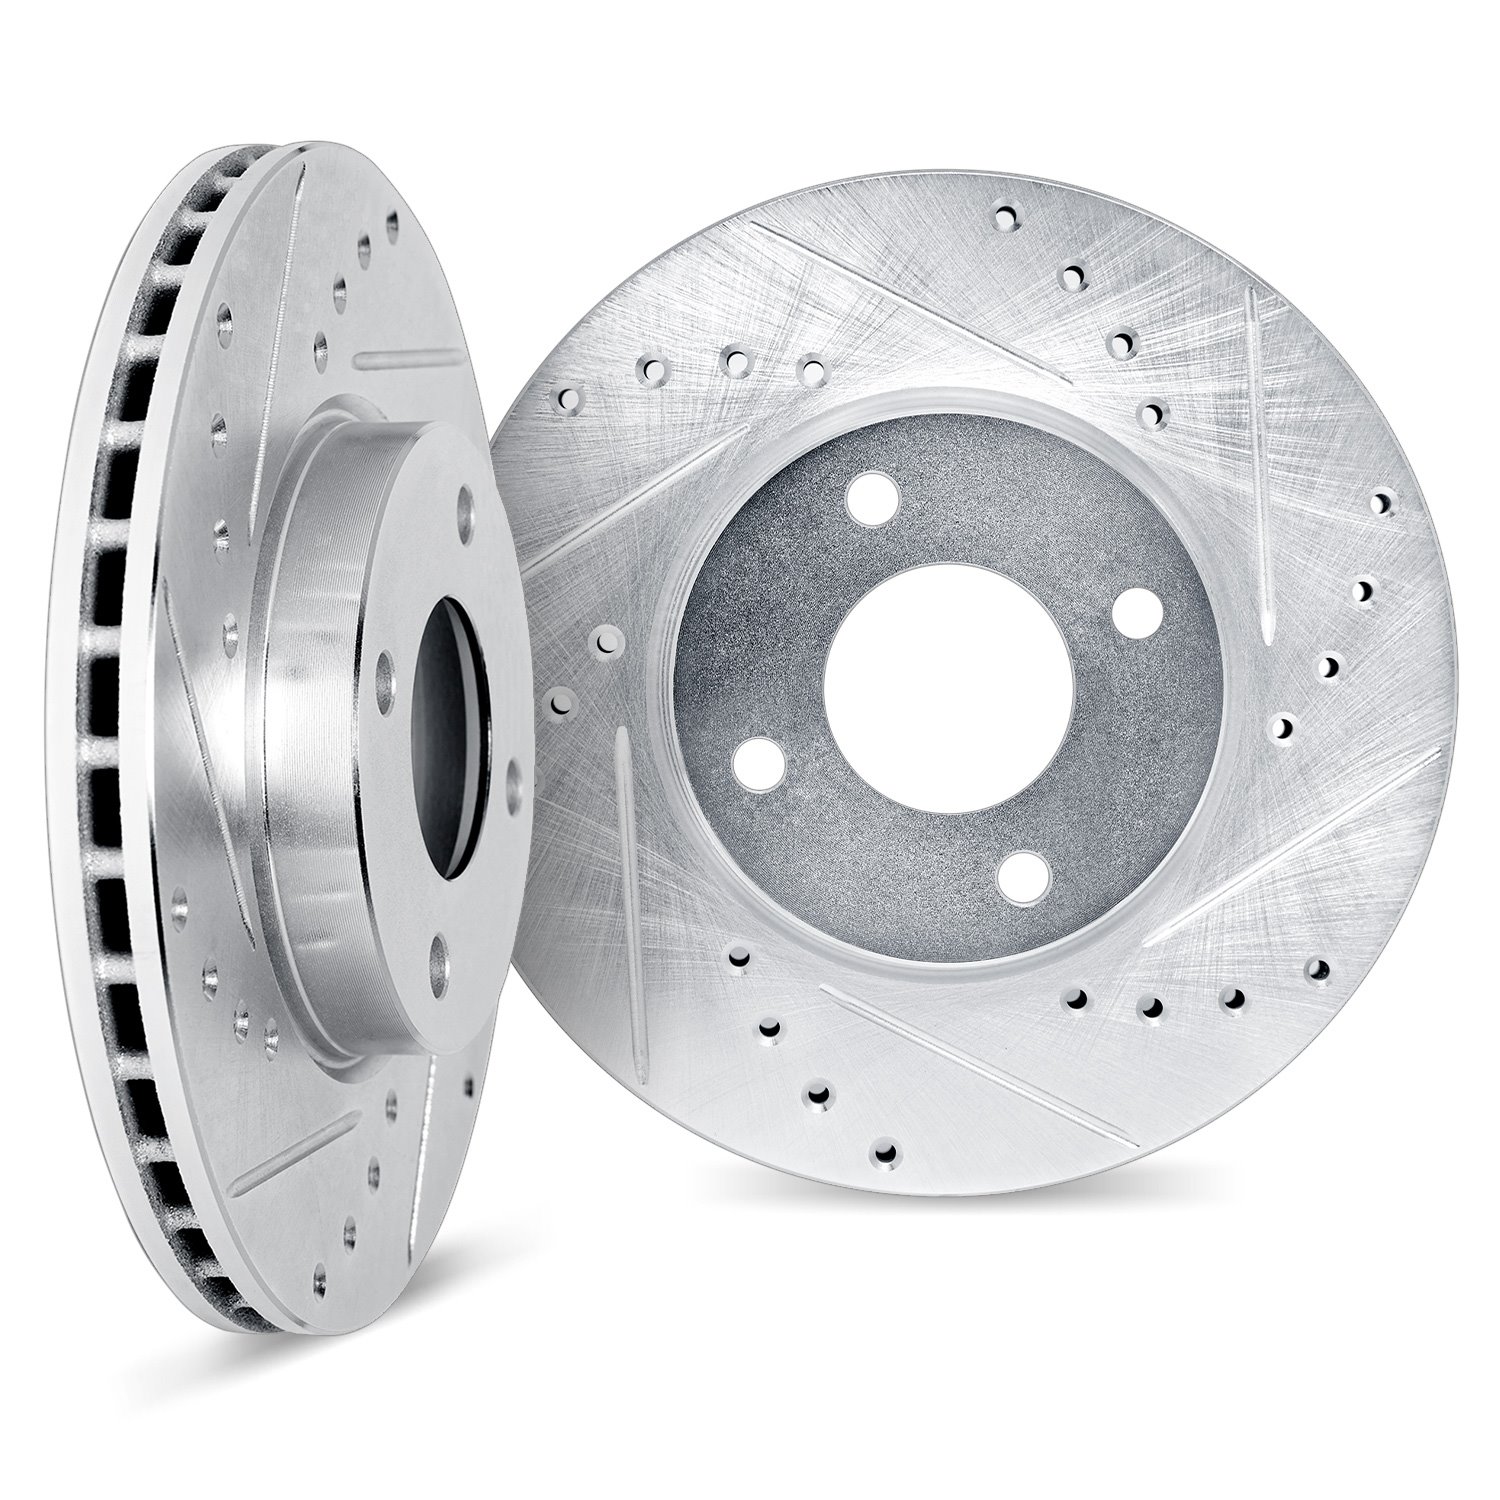 Drilled/Slotted Brake Rotors [Silver], 1995-2000 Infiniti/Nissan